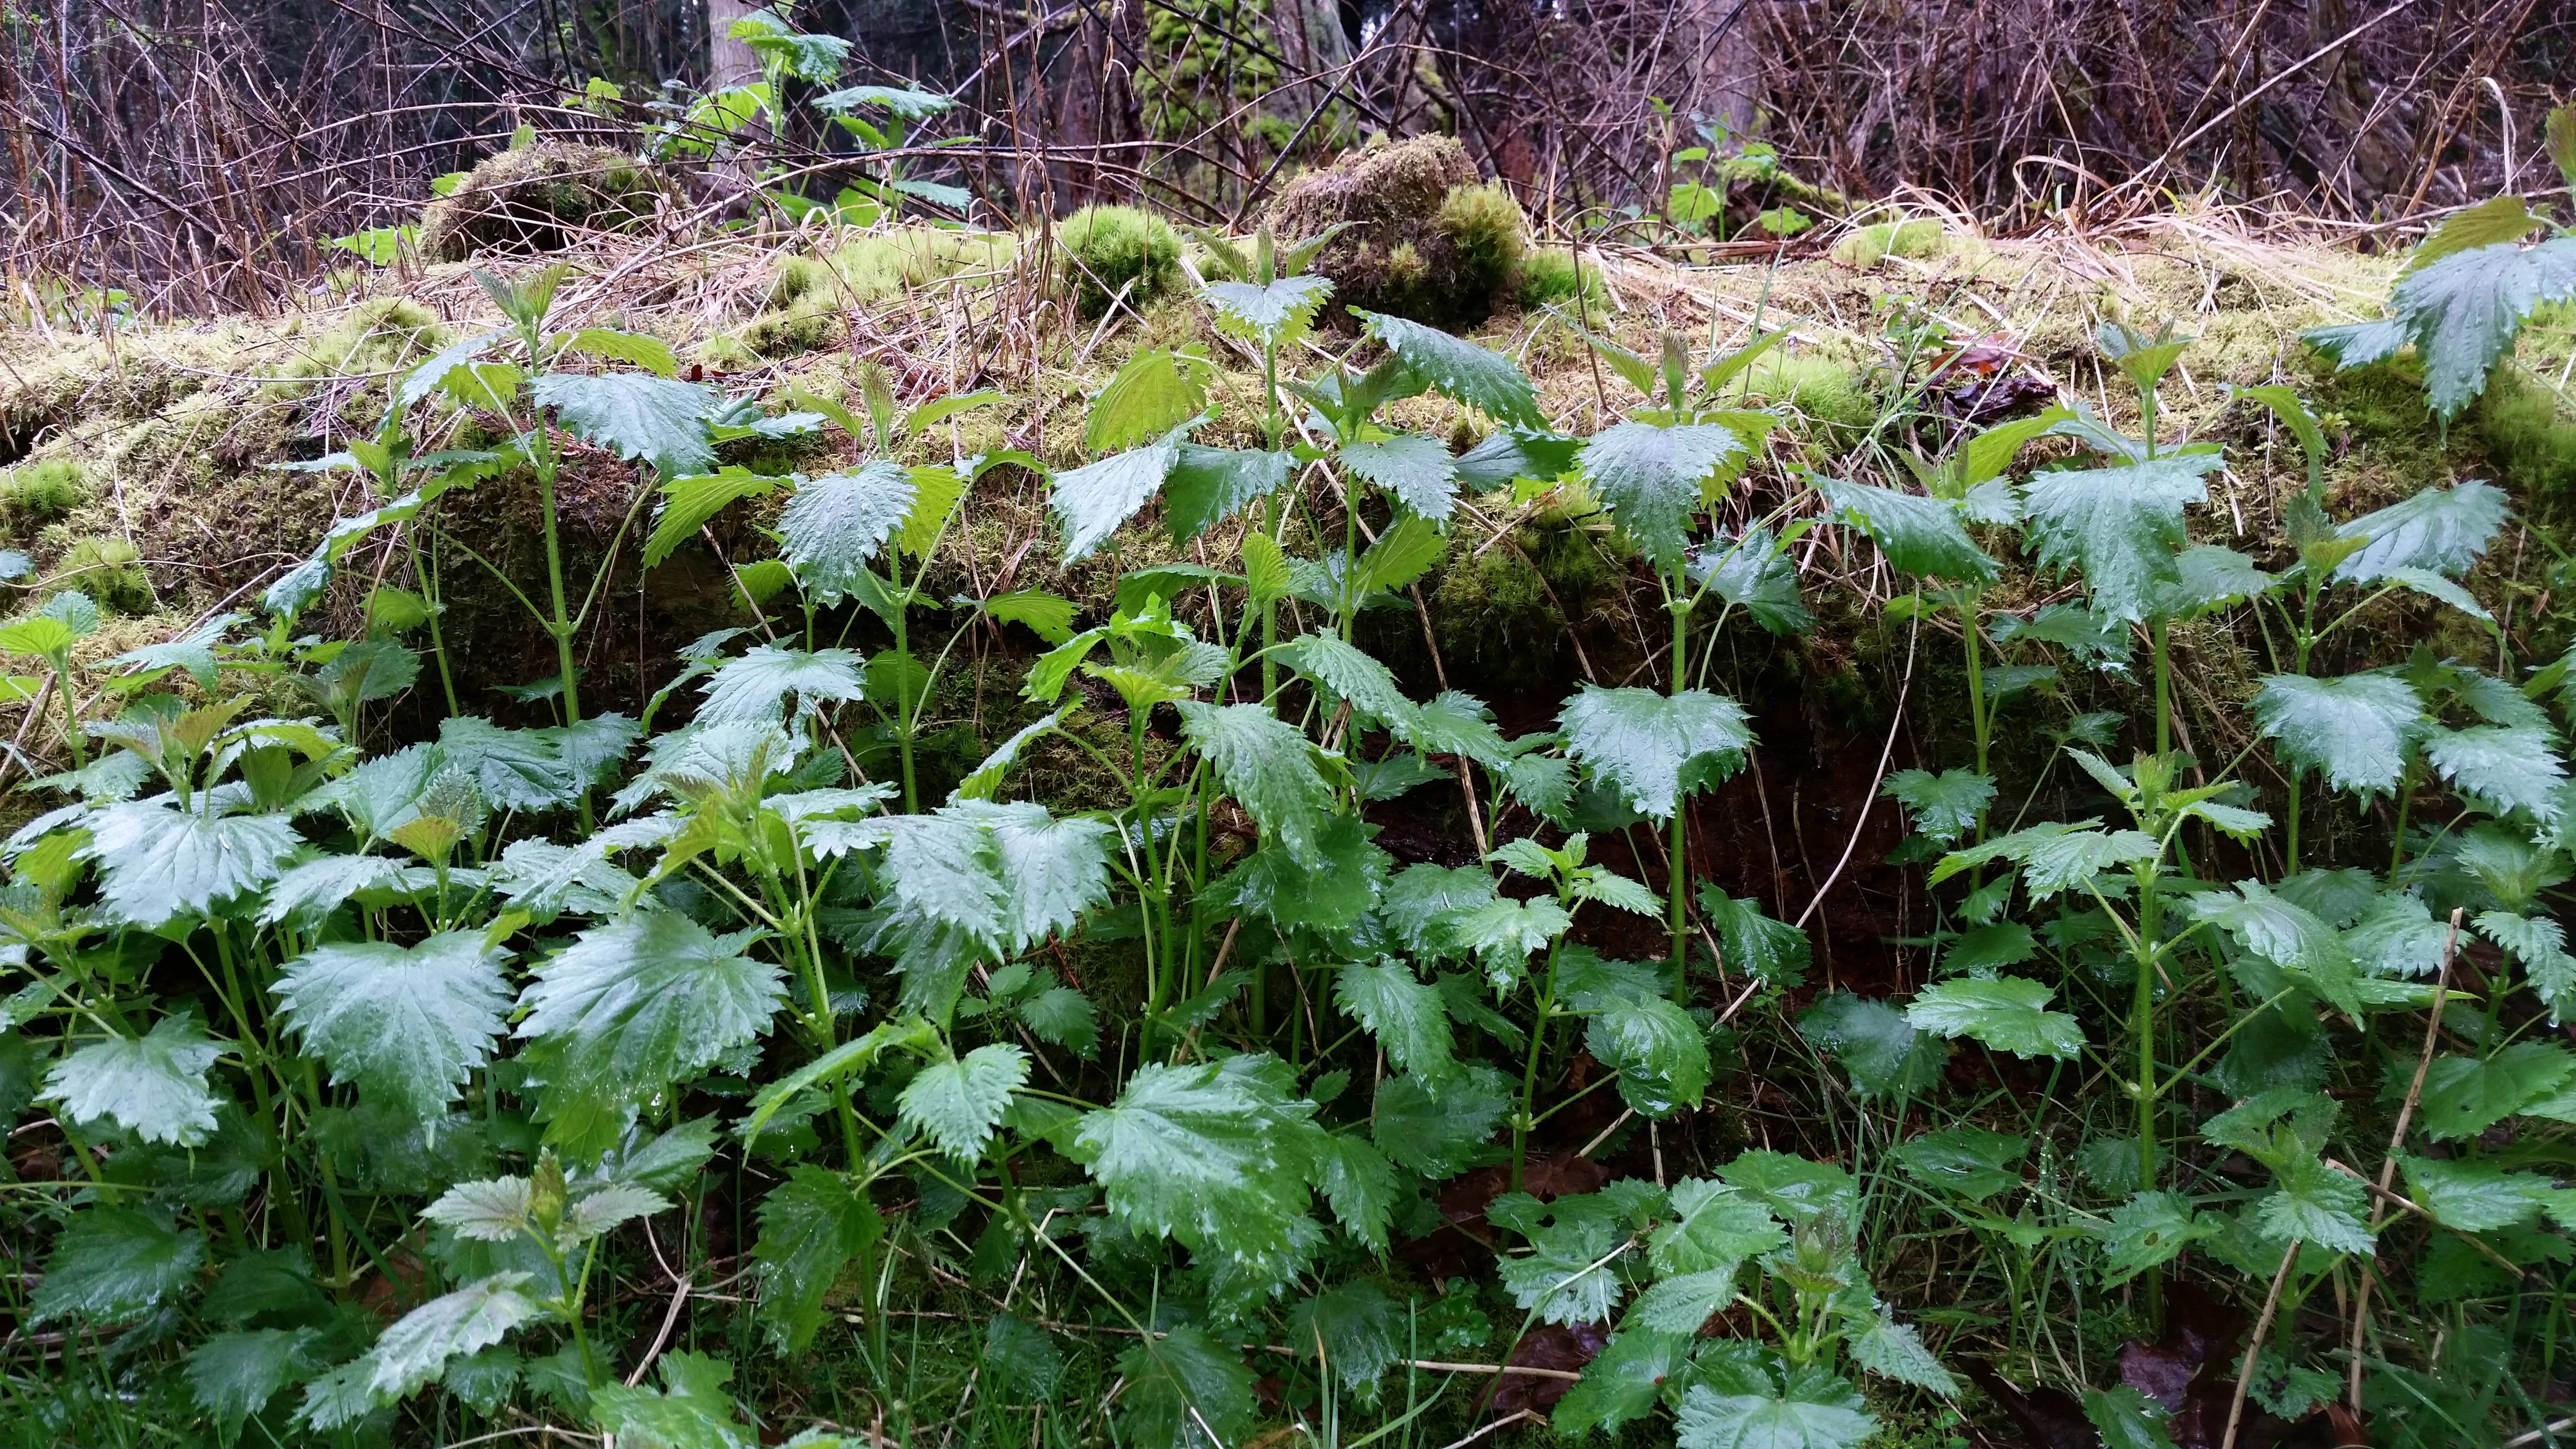 A fresh nettle patch growing on Orcas Island.